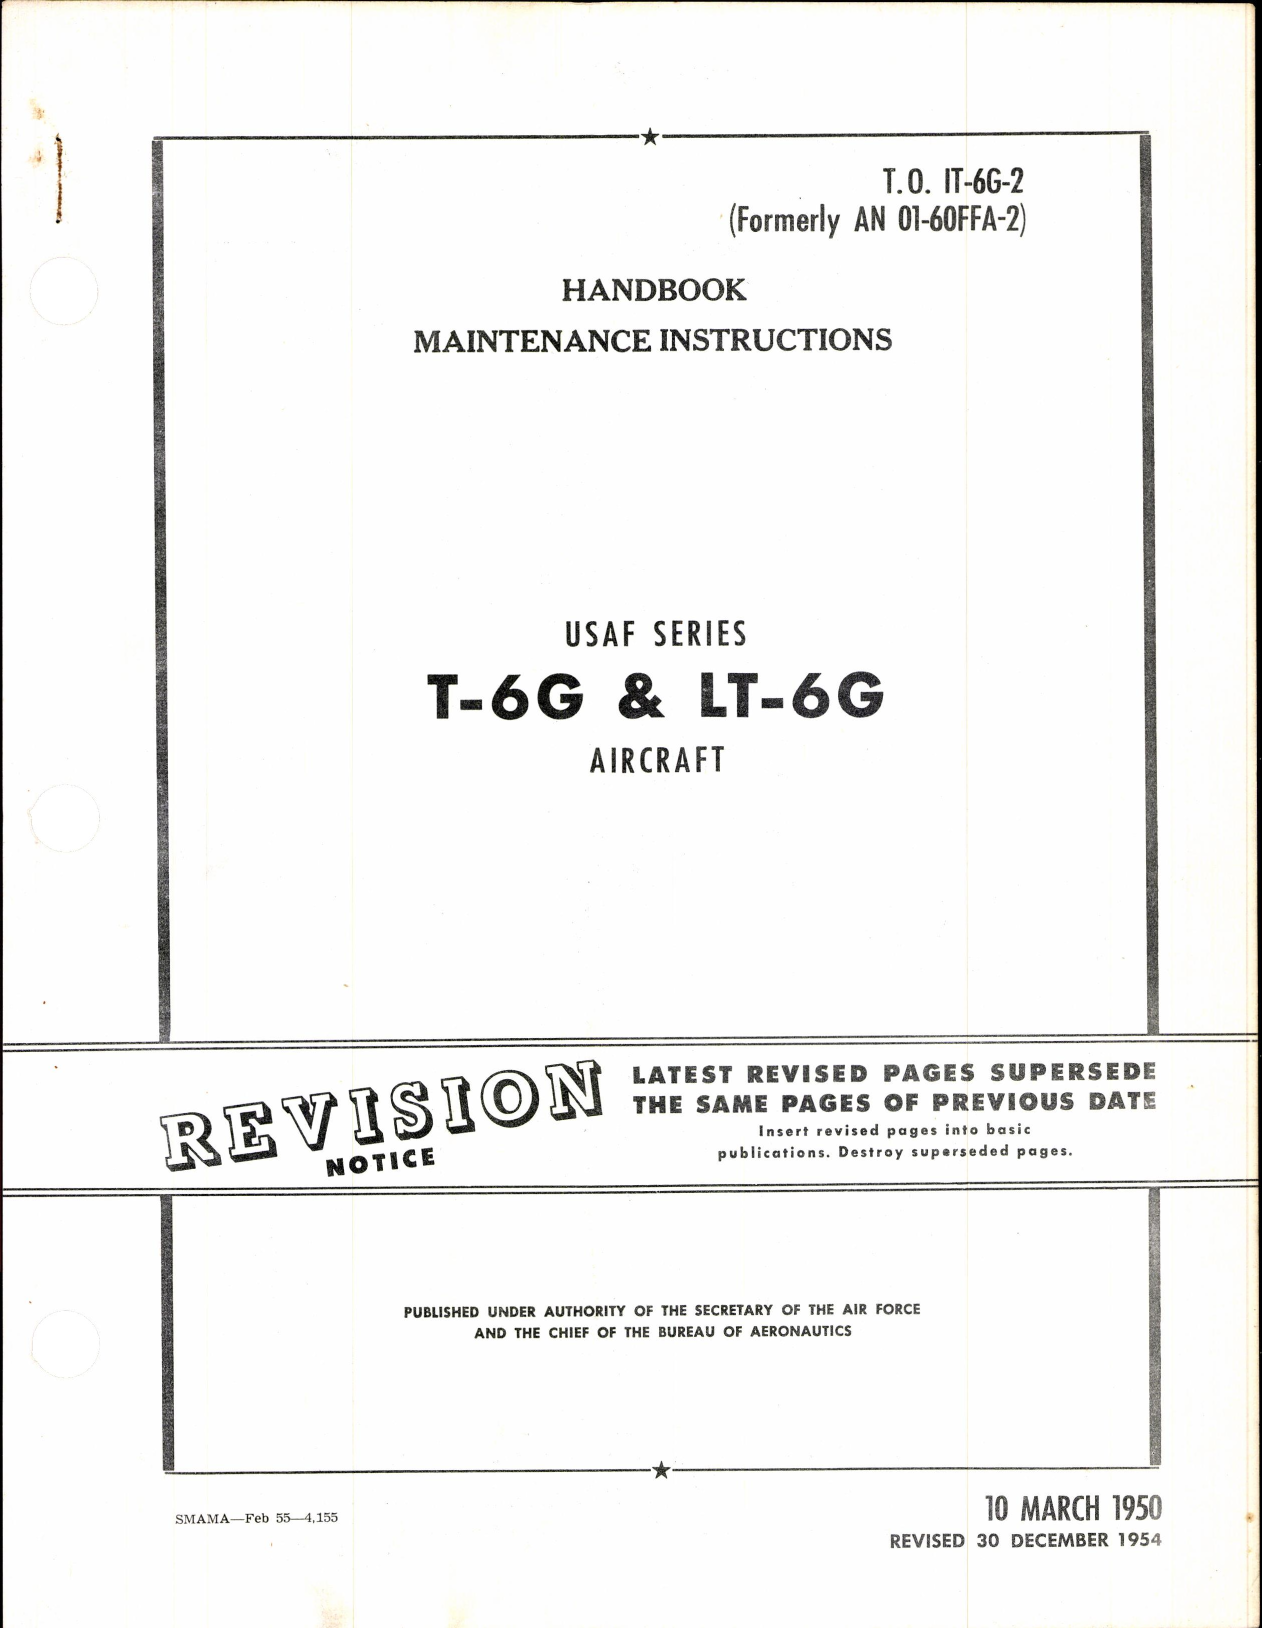 Sample page 1 from AirCorps Library document: Maintenance Instructions for T-6G and LT-6G Aircraft